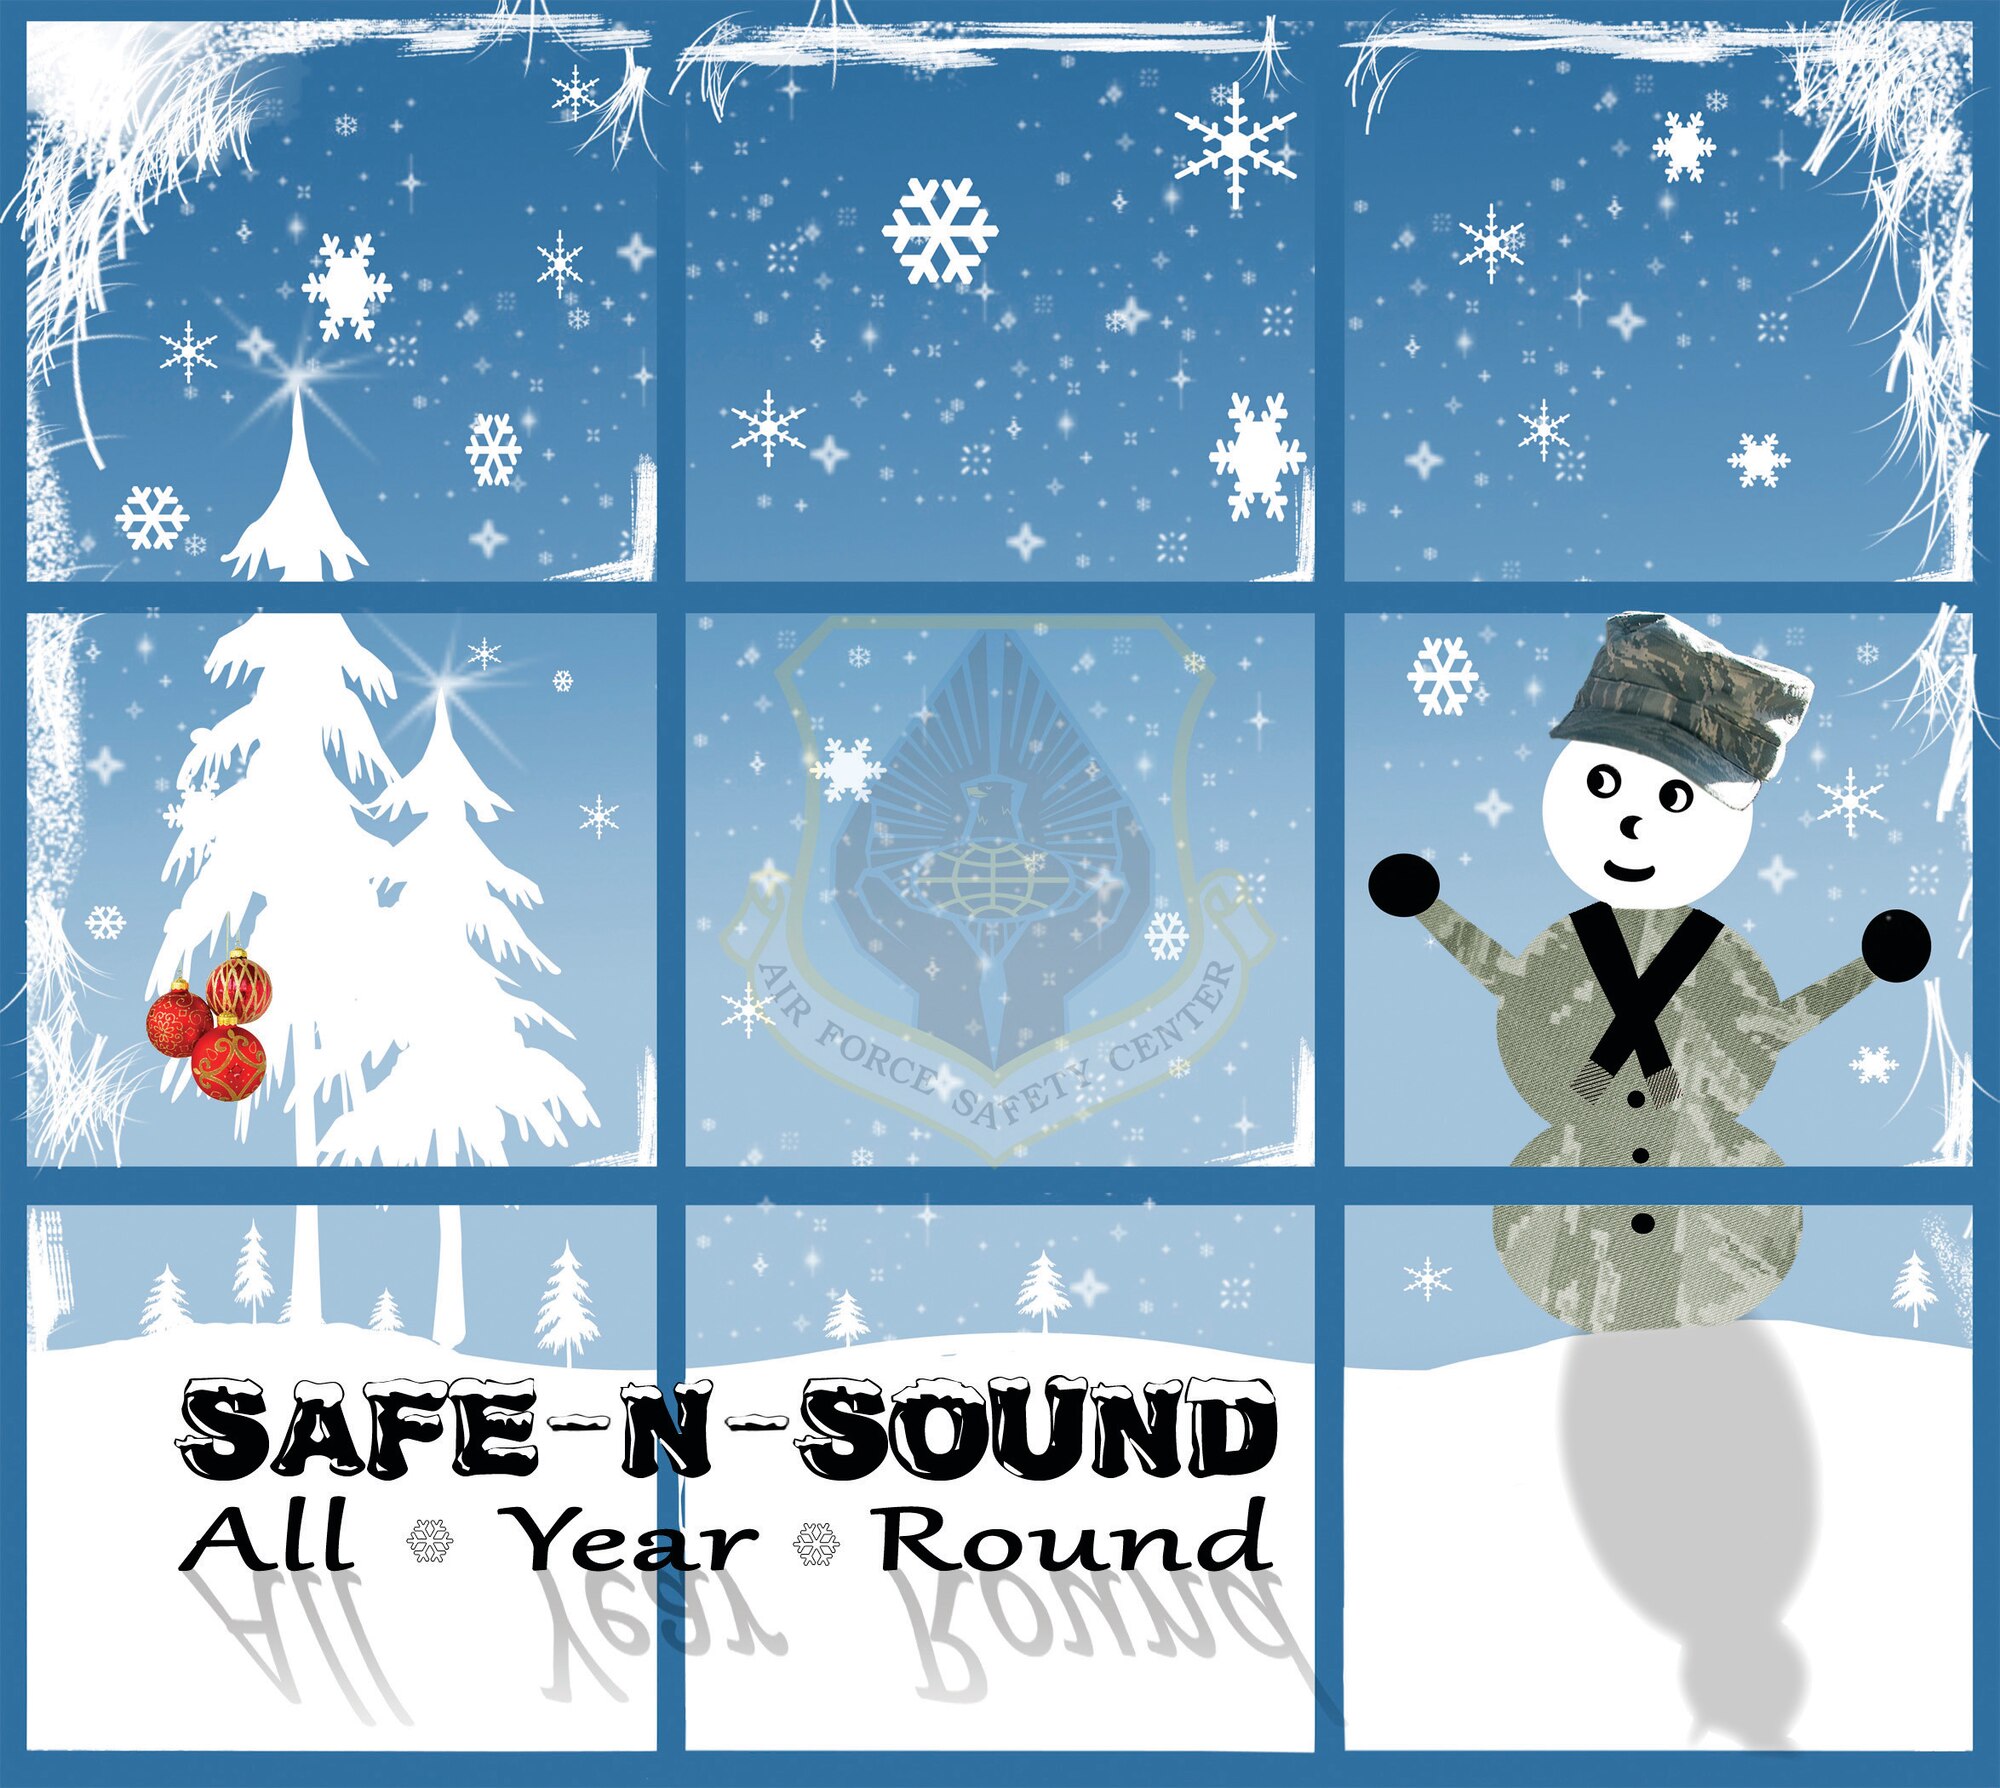 2012 Holiday Campaign logo, Safe-n-Sound All Year Round. (Air Force graphic/Natalie Eslinger)